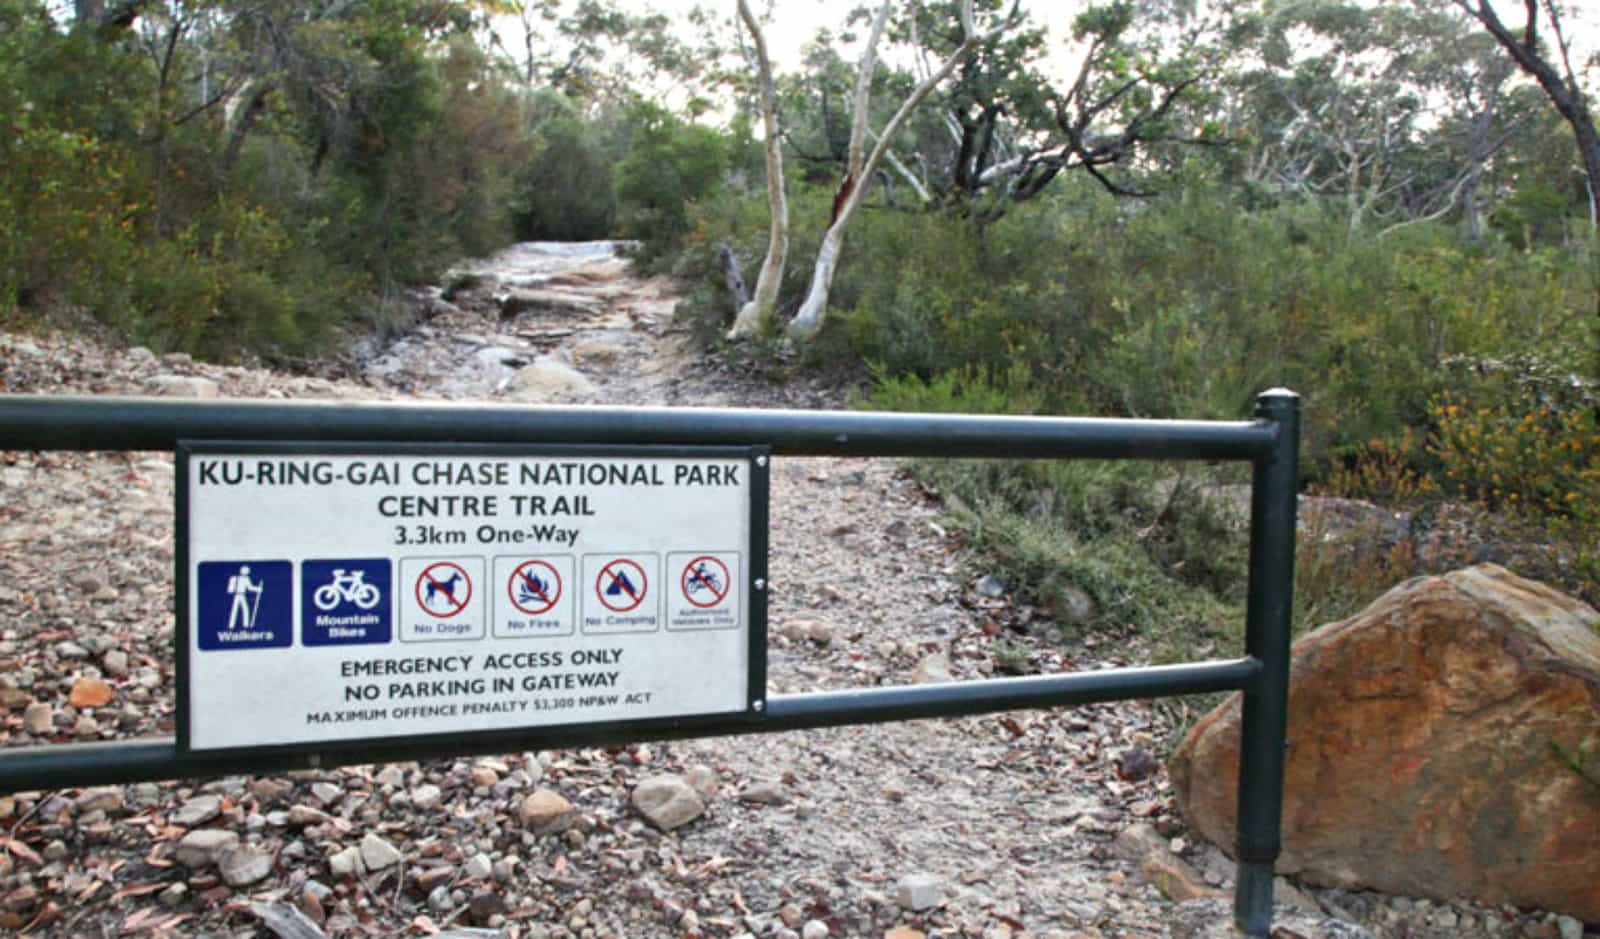 Centre trail, Ku-ring-gai Chase National Park. Photo: Andy Richards/NSW Government